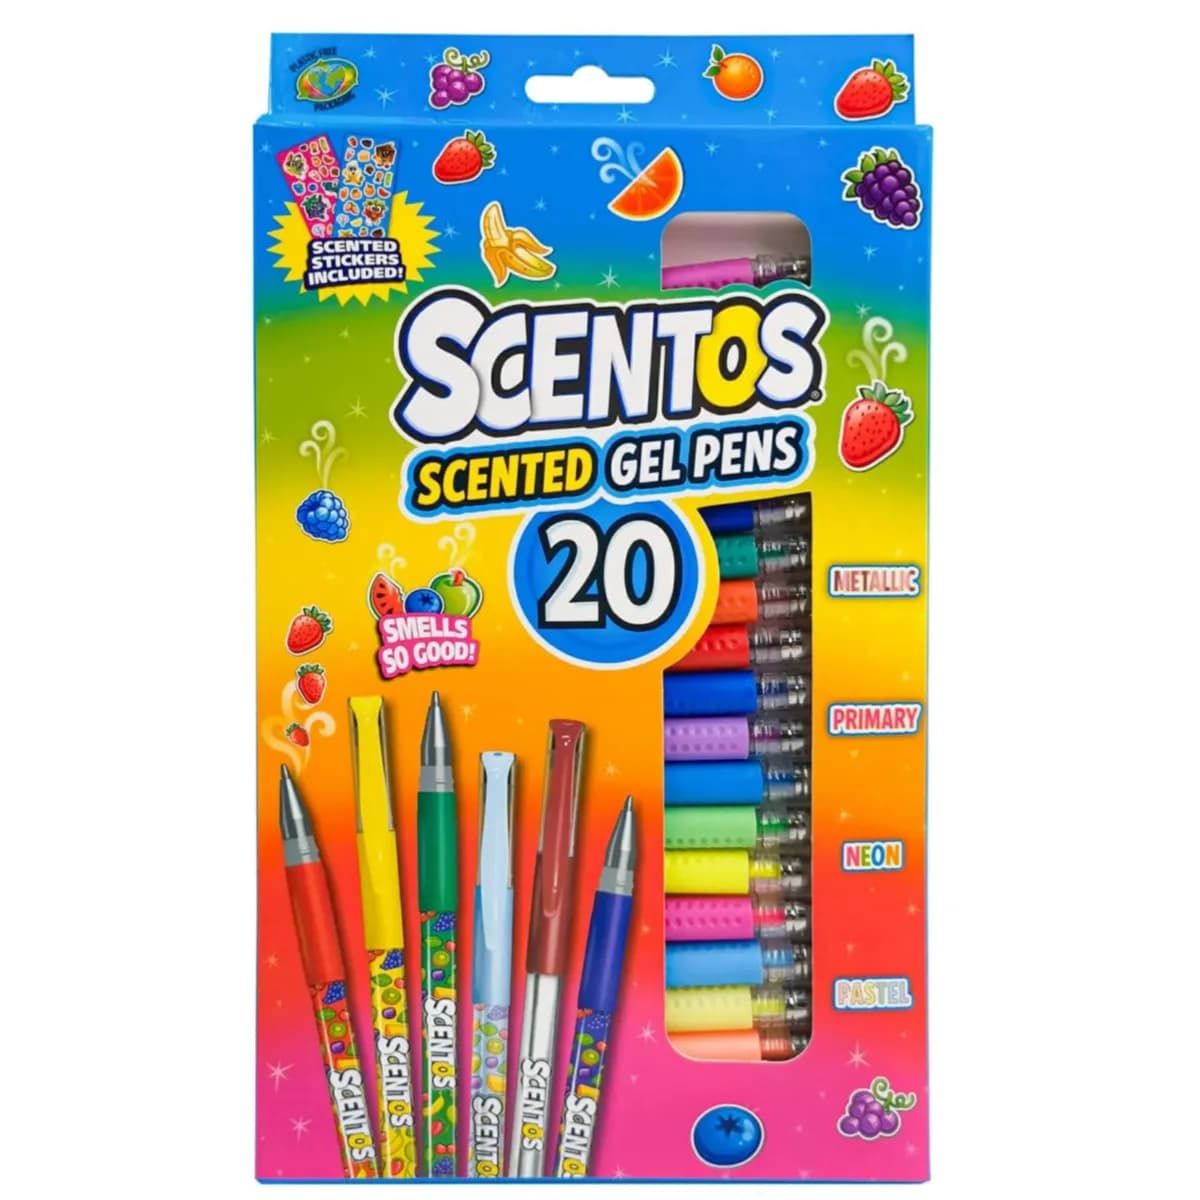 Scentos Scented Gel Pen With Stickers - Pack of 20 - PNFS59